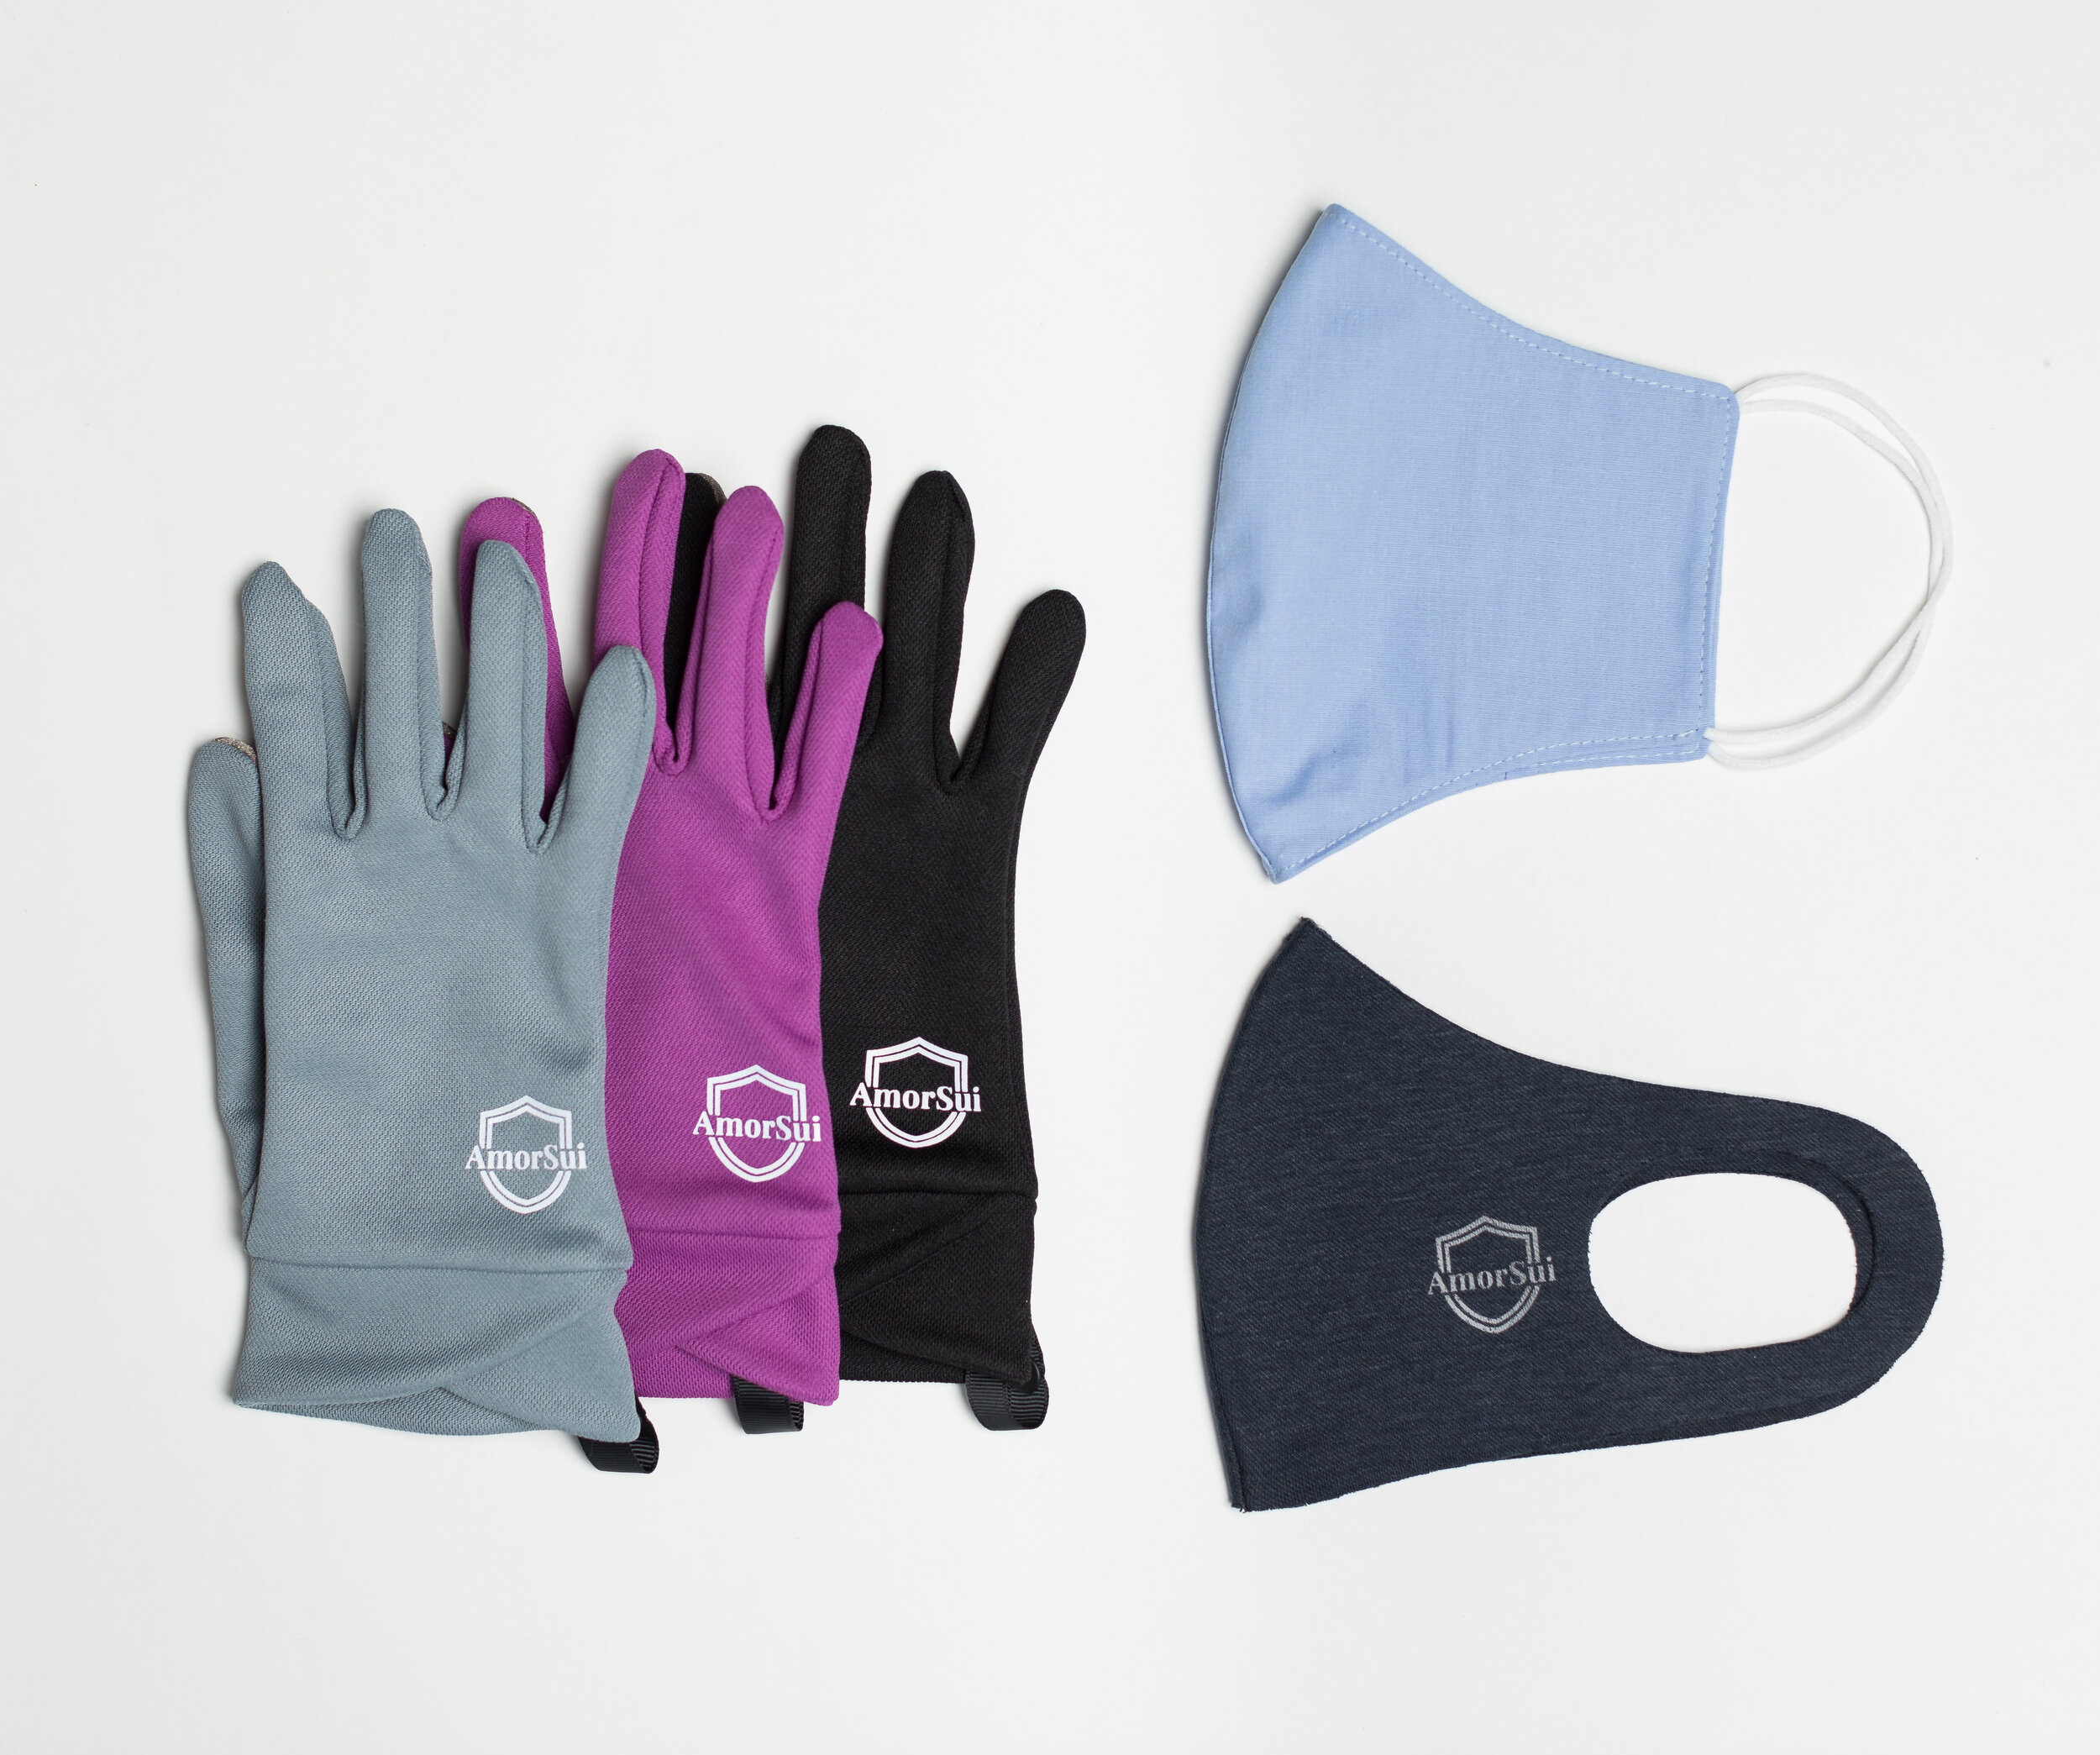 Reusable gloves and face masks